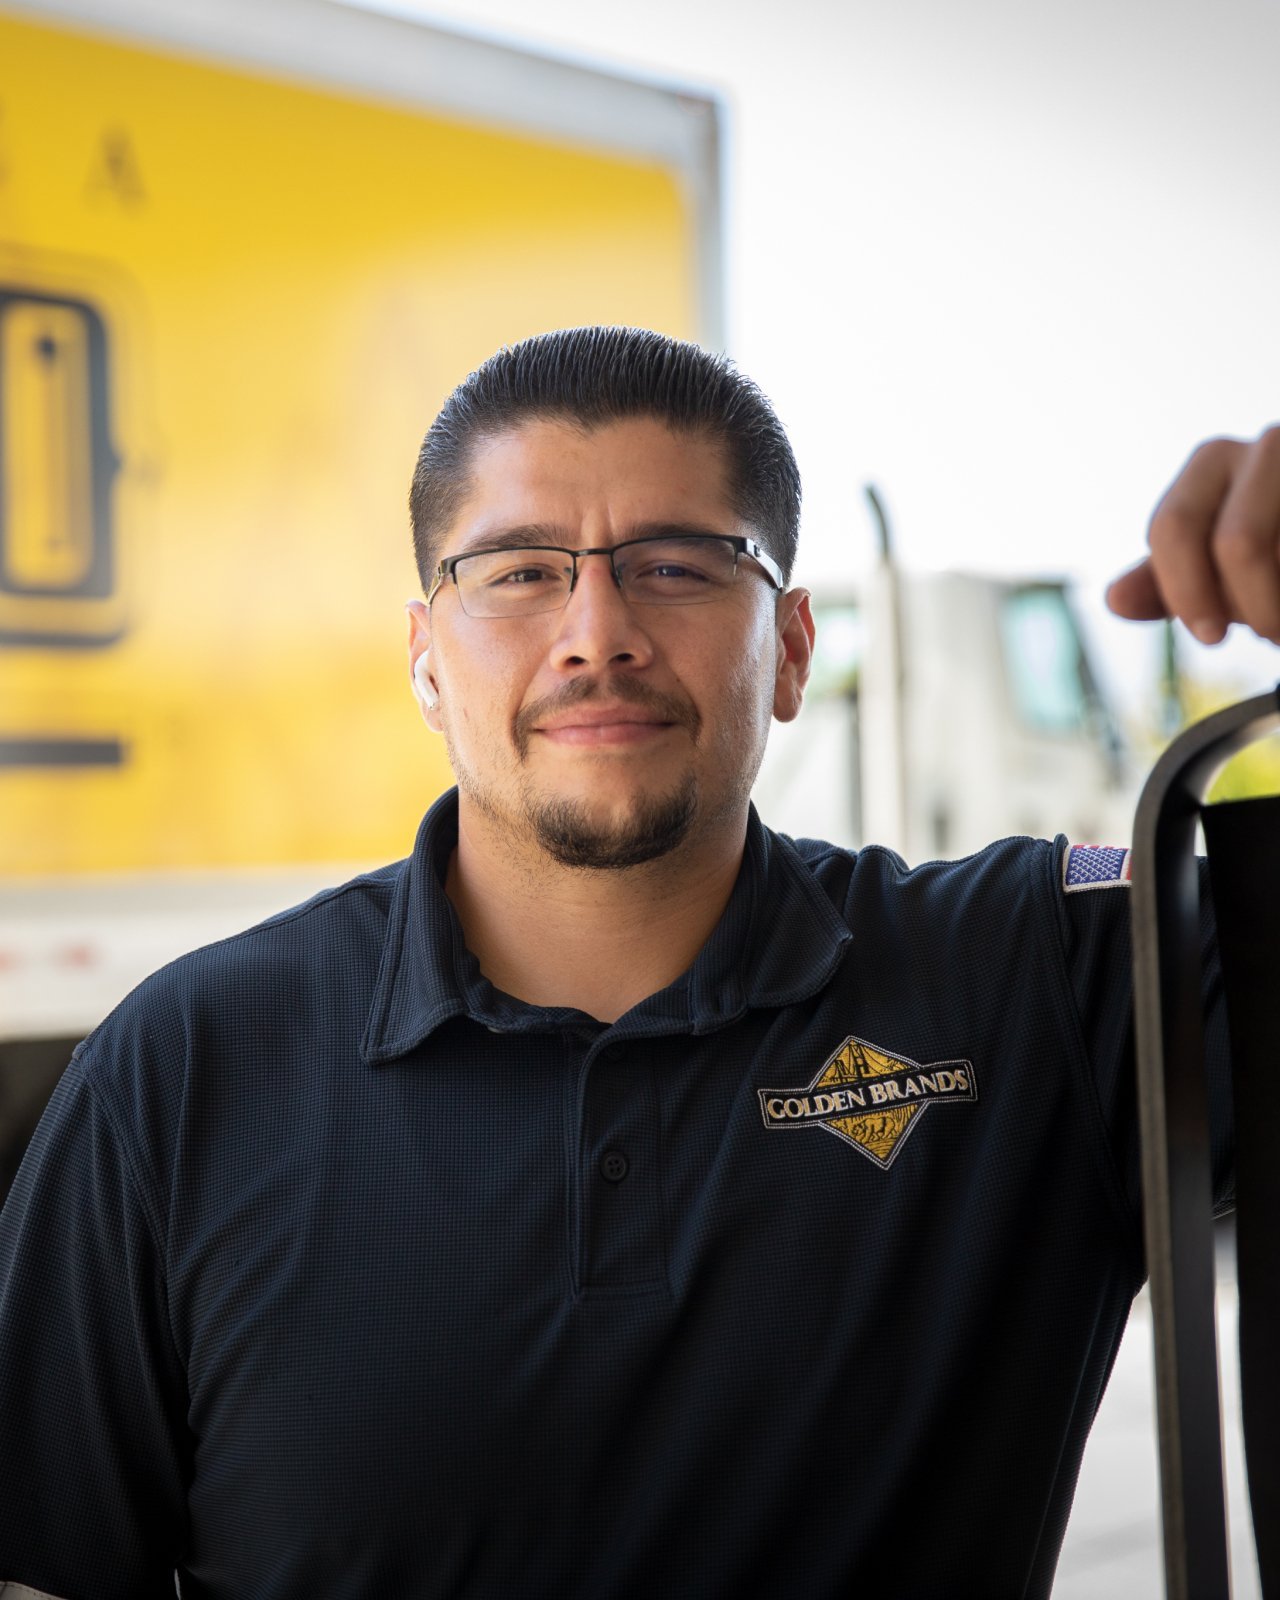 A man wearing a navy polo type shirt standing outside near a yellow truck